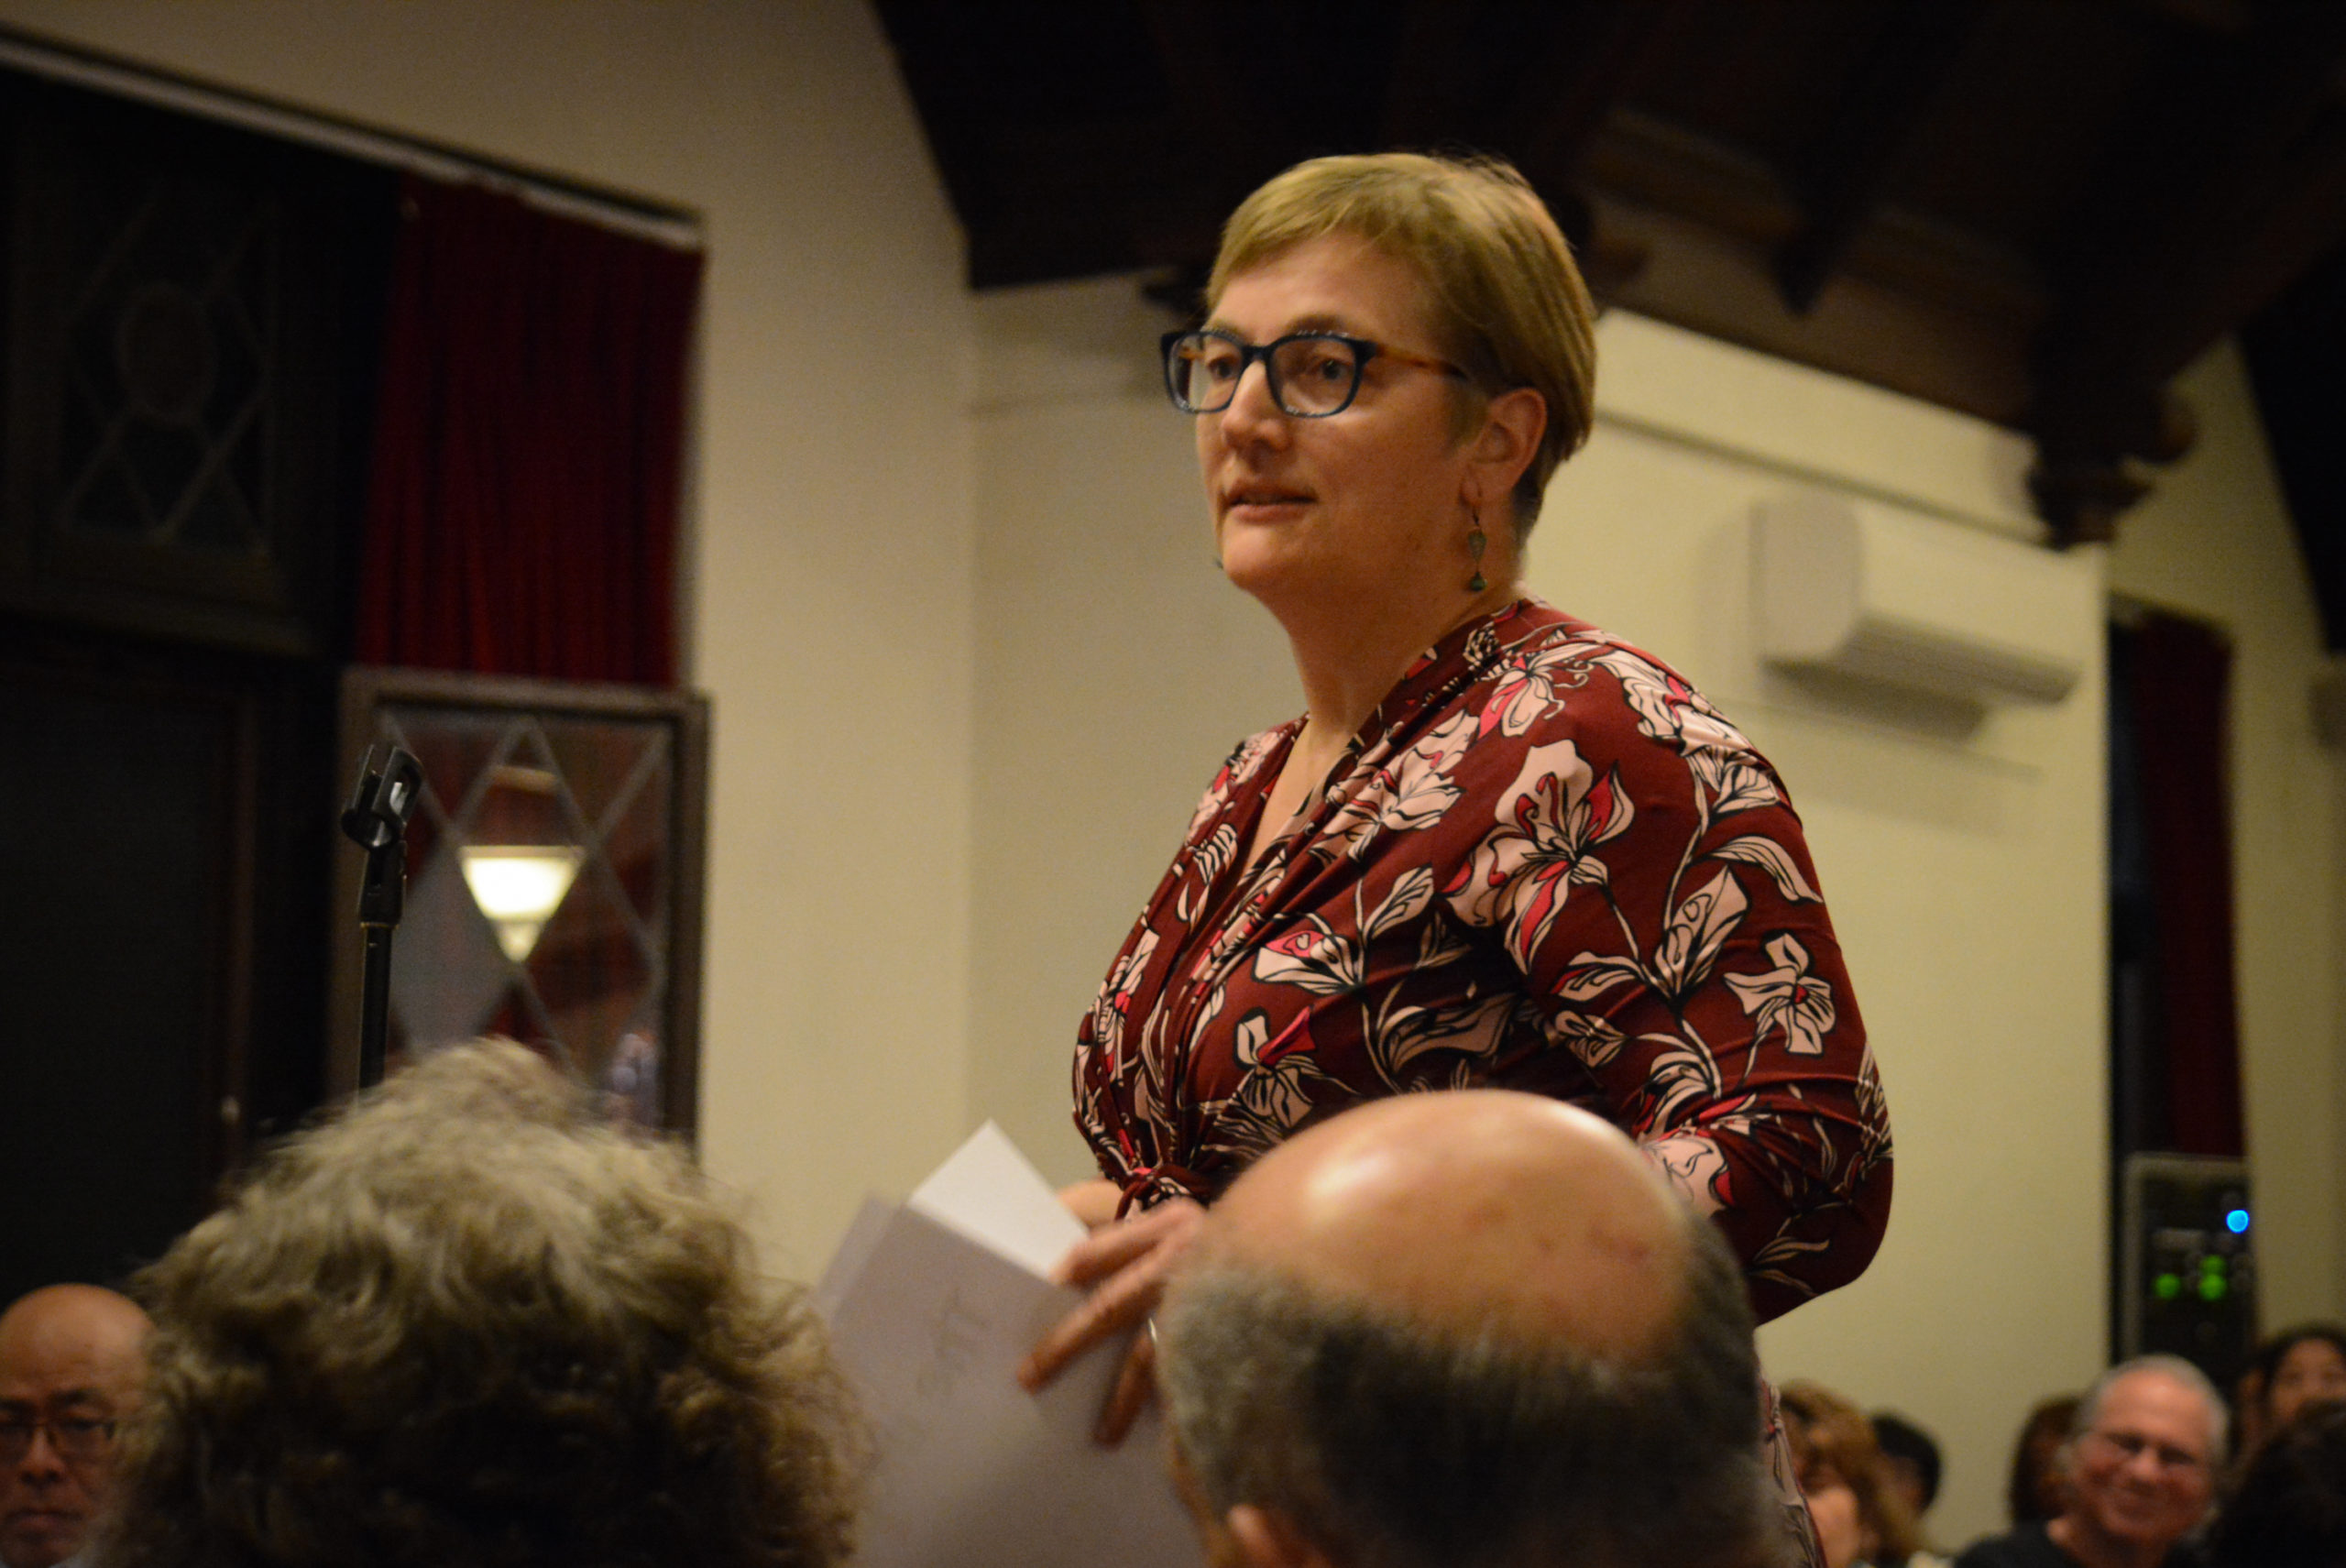 Sabine Margolis, a Thomaston resident, was one of several residents who attended and spoke at a town hall about revitalization for Middle Neck Road on Monday night. (Photo by Janelle Clausen)